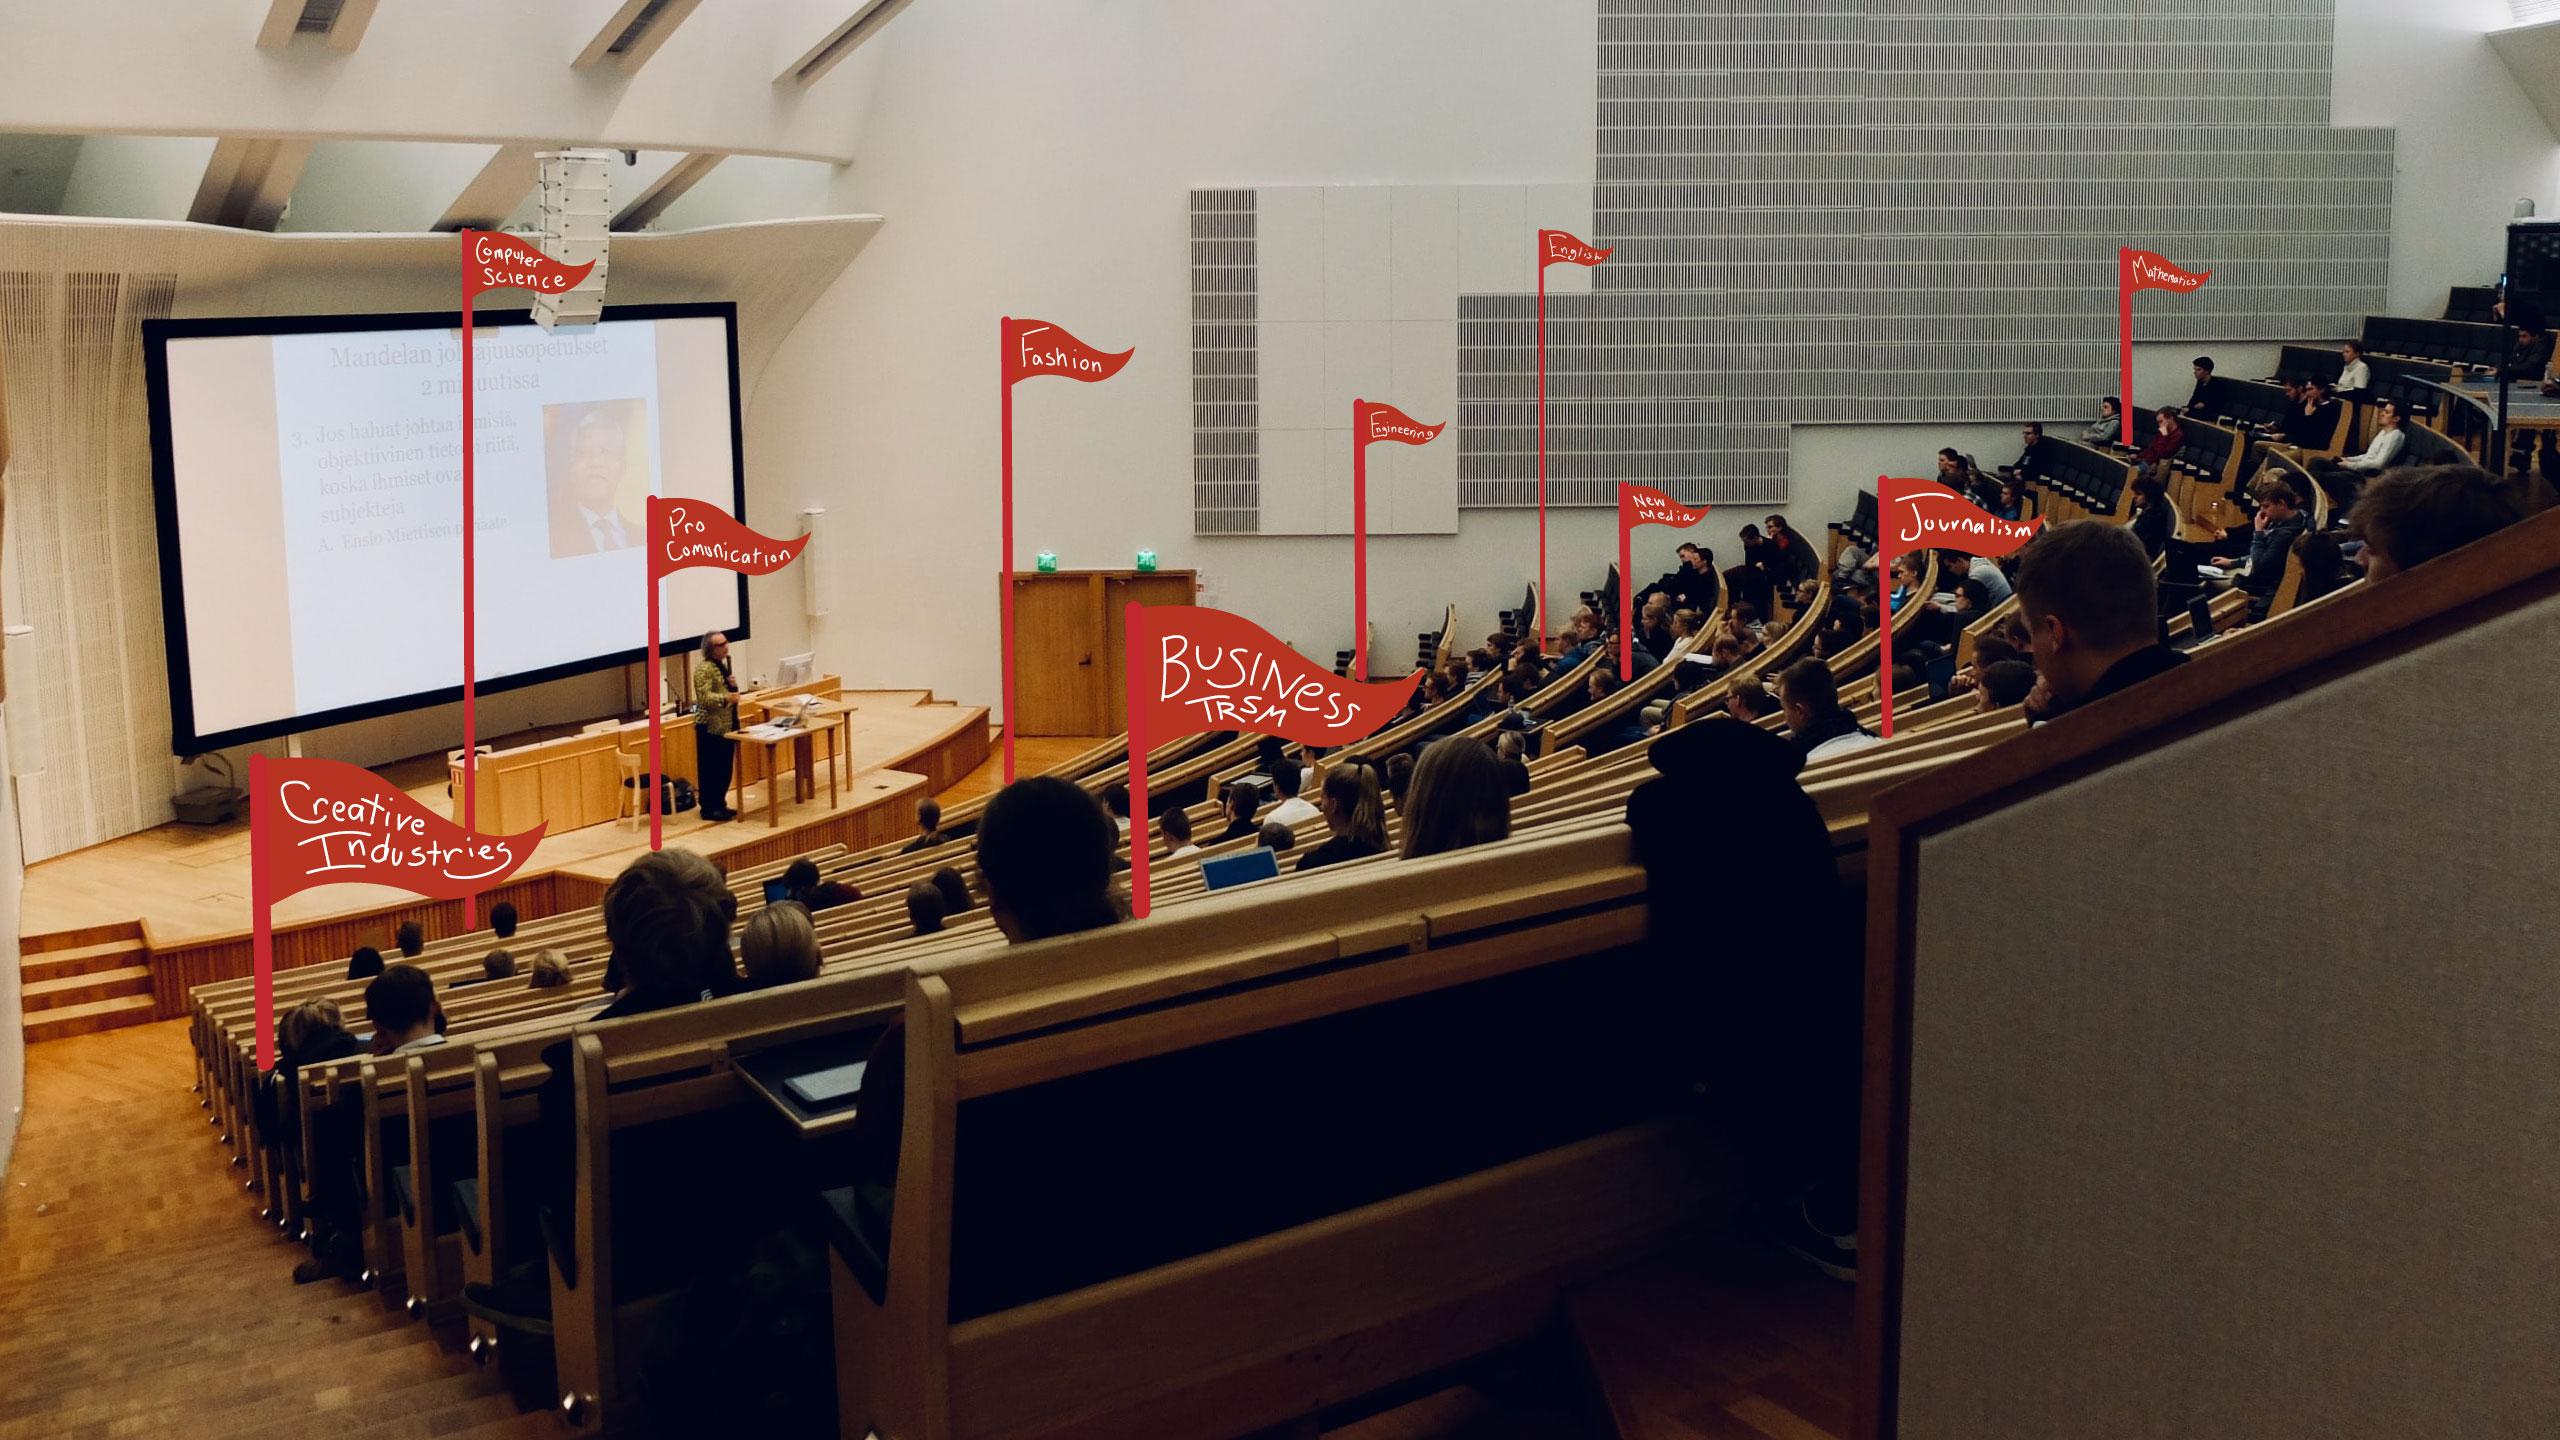 a photograph of a filled lecture hall with illustrated red flags emerging from the seats.